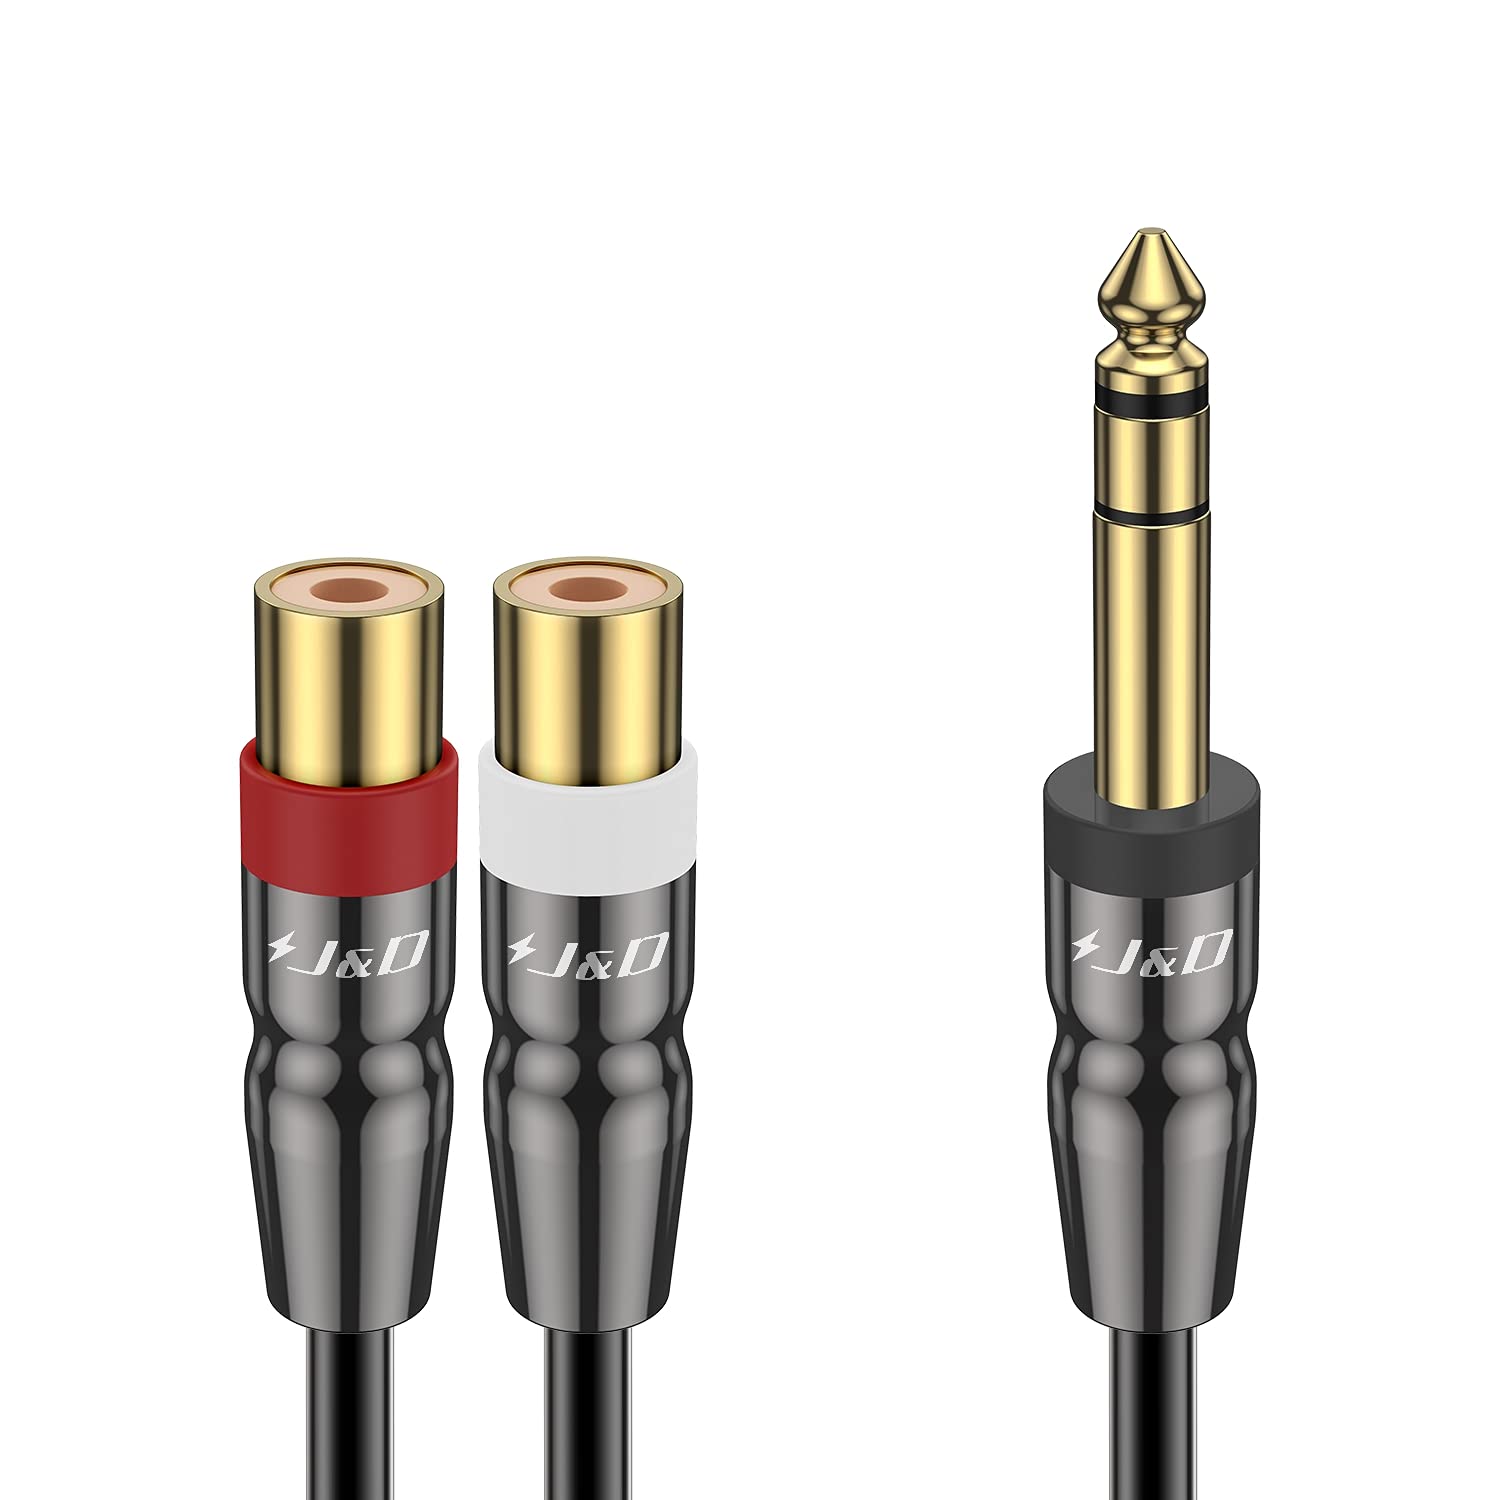 J&D Gold-Plated 2RCA Male to 2RCA Male Copper Shell Stereo Audio Cable, RCA  Audio Cables, 15 ft 